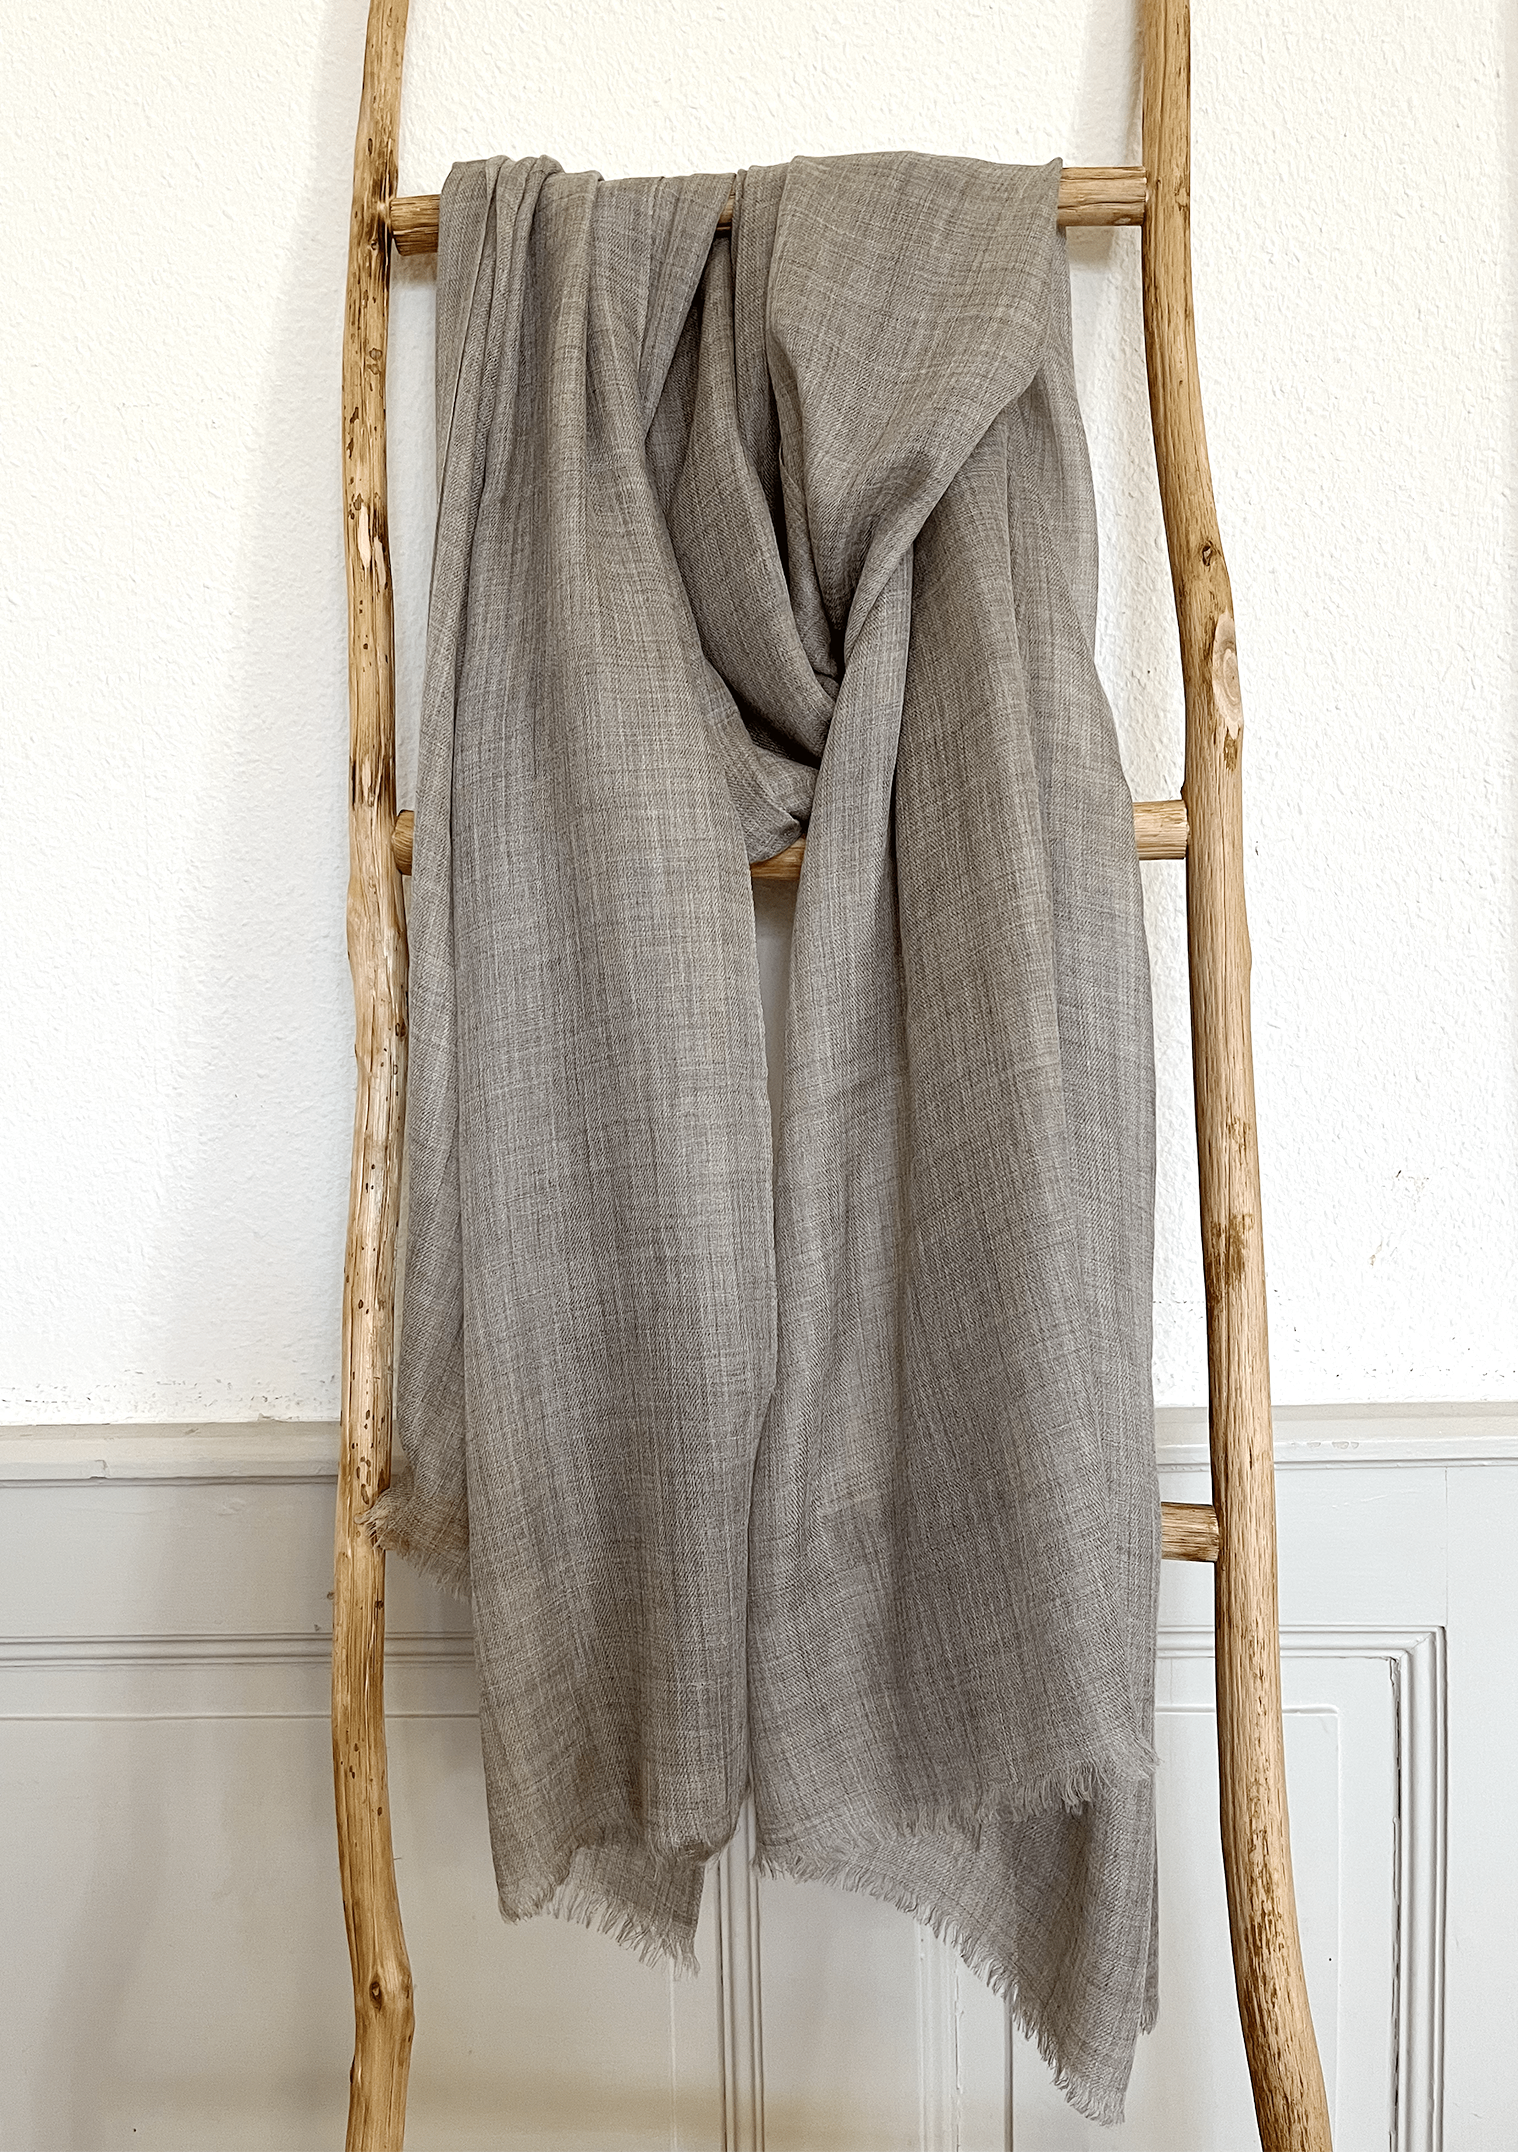 Laal's Pure Baby Pashmina Shawl, embodying luxury with its ultra-soft, lightweight, and breathable baby cashmere. Crafted from first-combed baby goat fibers, it features a delicate weave in five natural cashmere colors. Handspun and woven in Kathmandu, this oversized, unisex shawl with eyelash fringes is versatile for autumn, winter, and spring. Warm, comfortable, and itch-free, it's an ideal gift for any occasion.